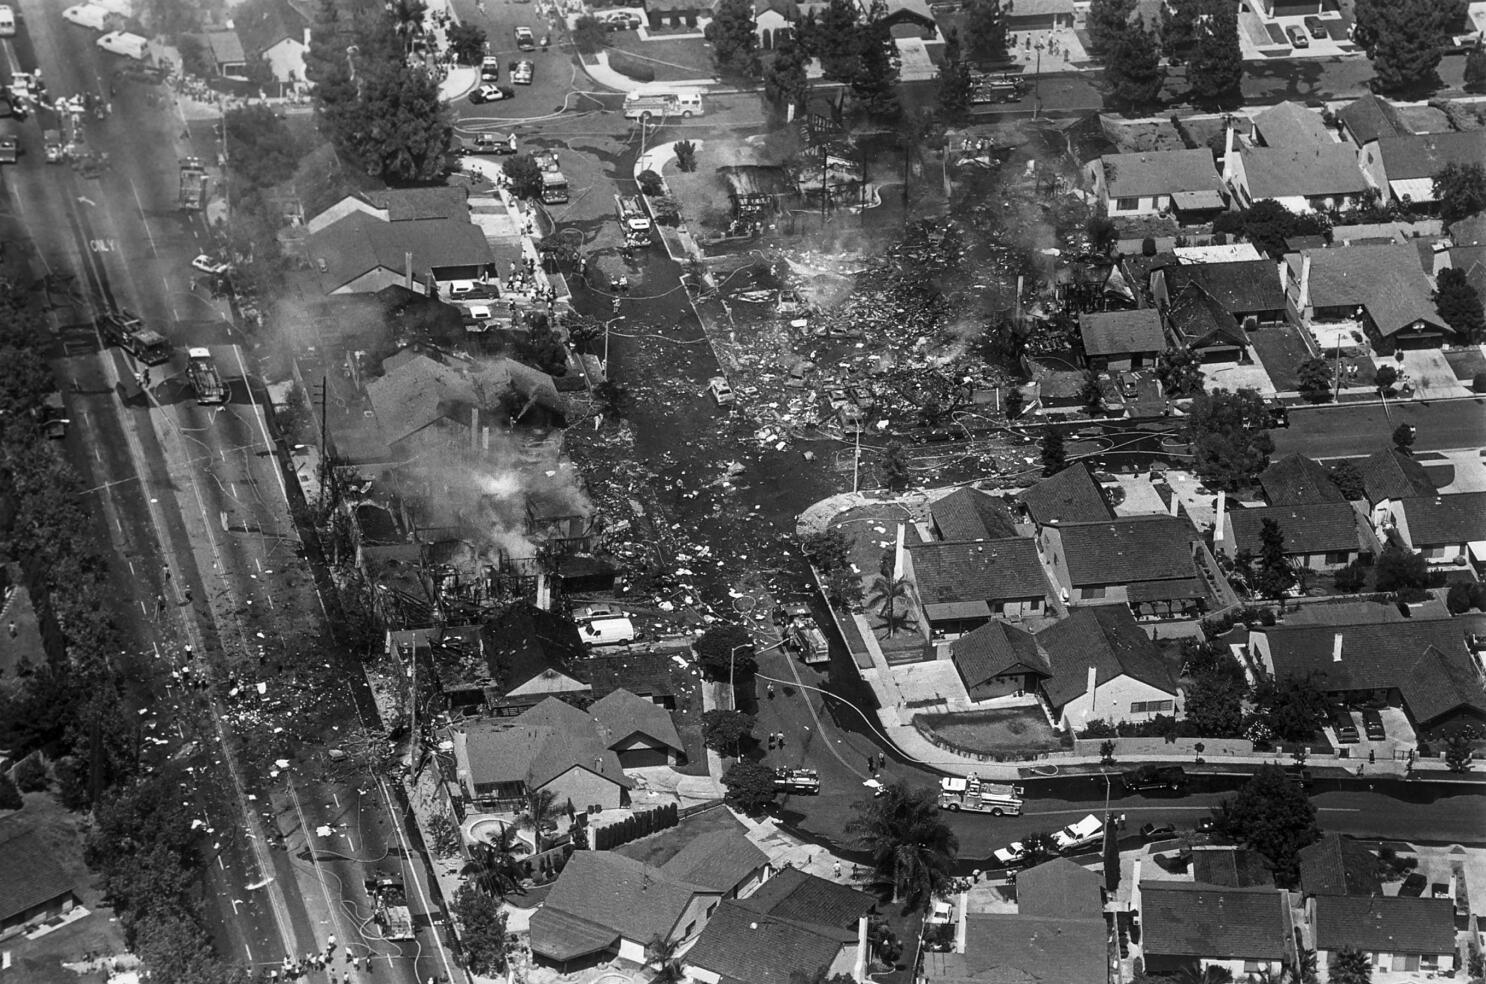 How the deadly 1986 Cerritos midair collision ultimately made air